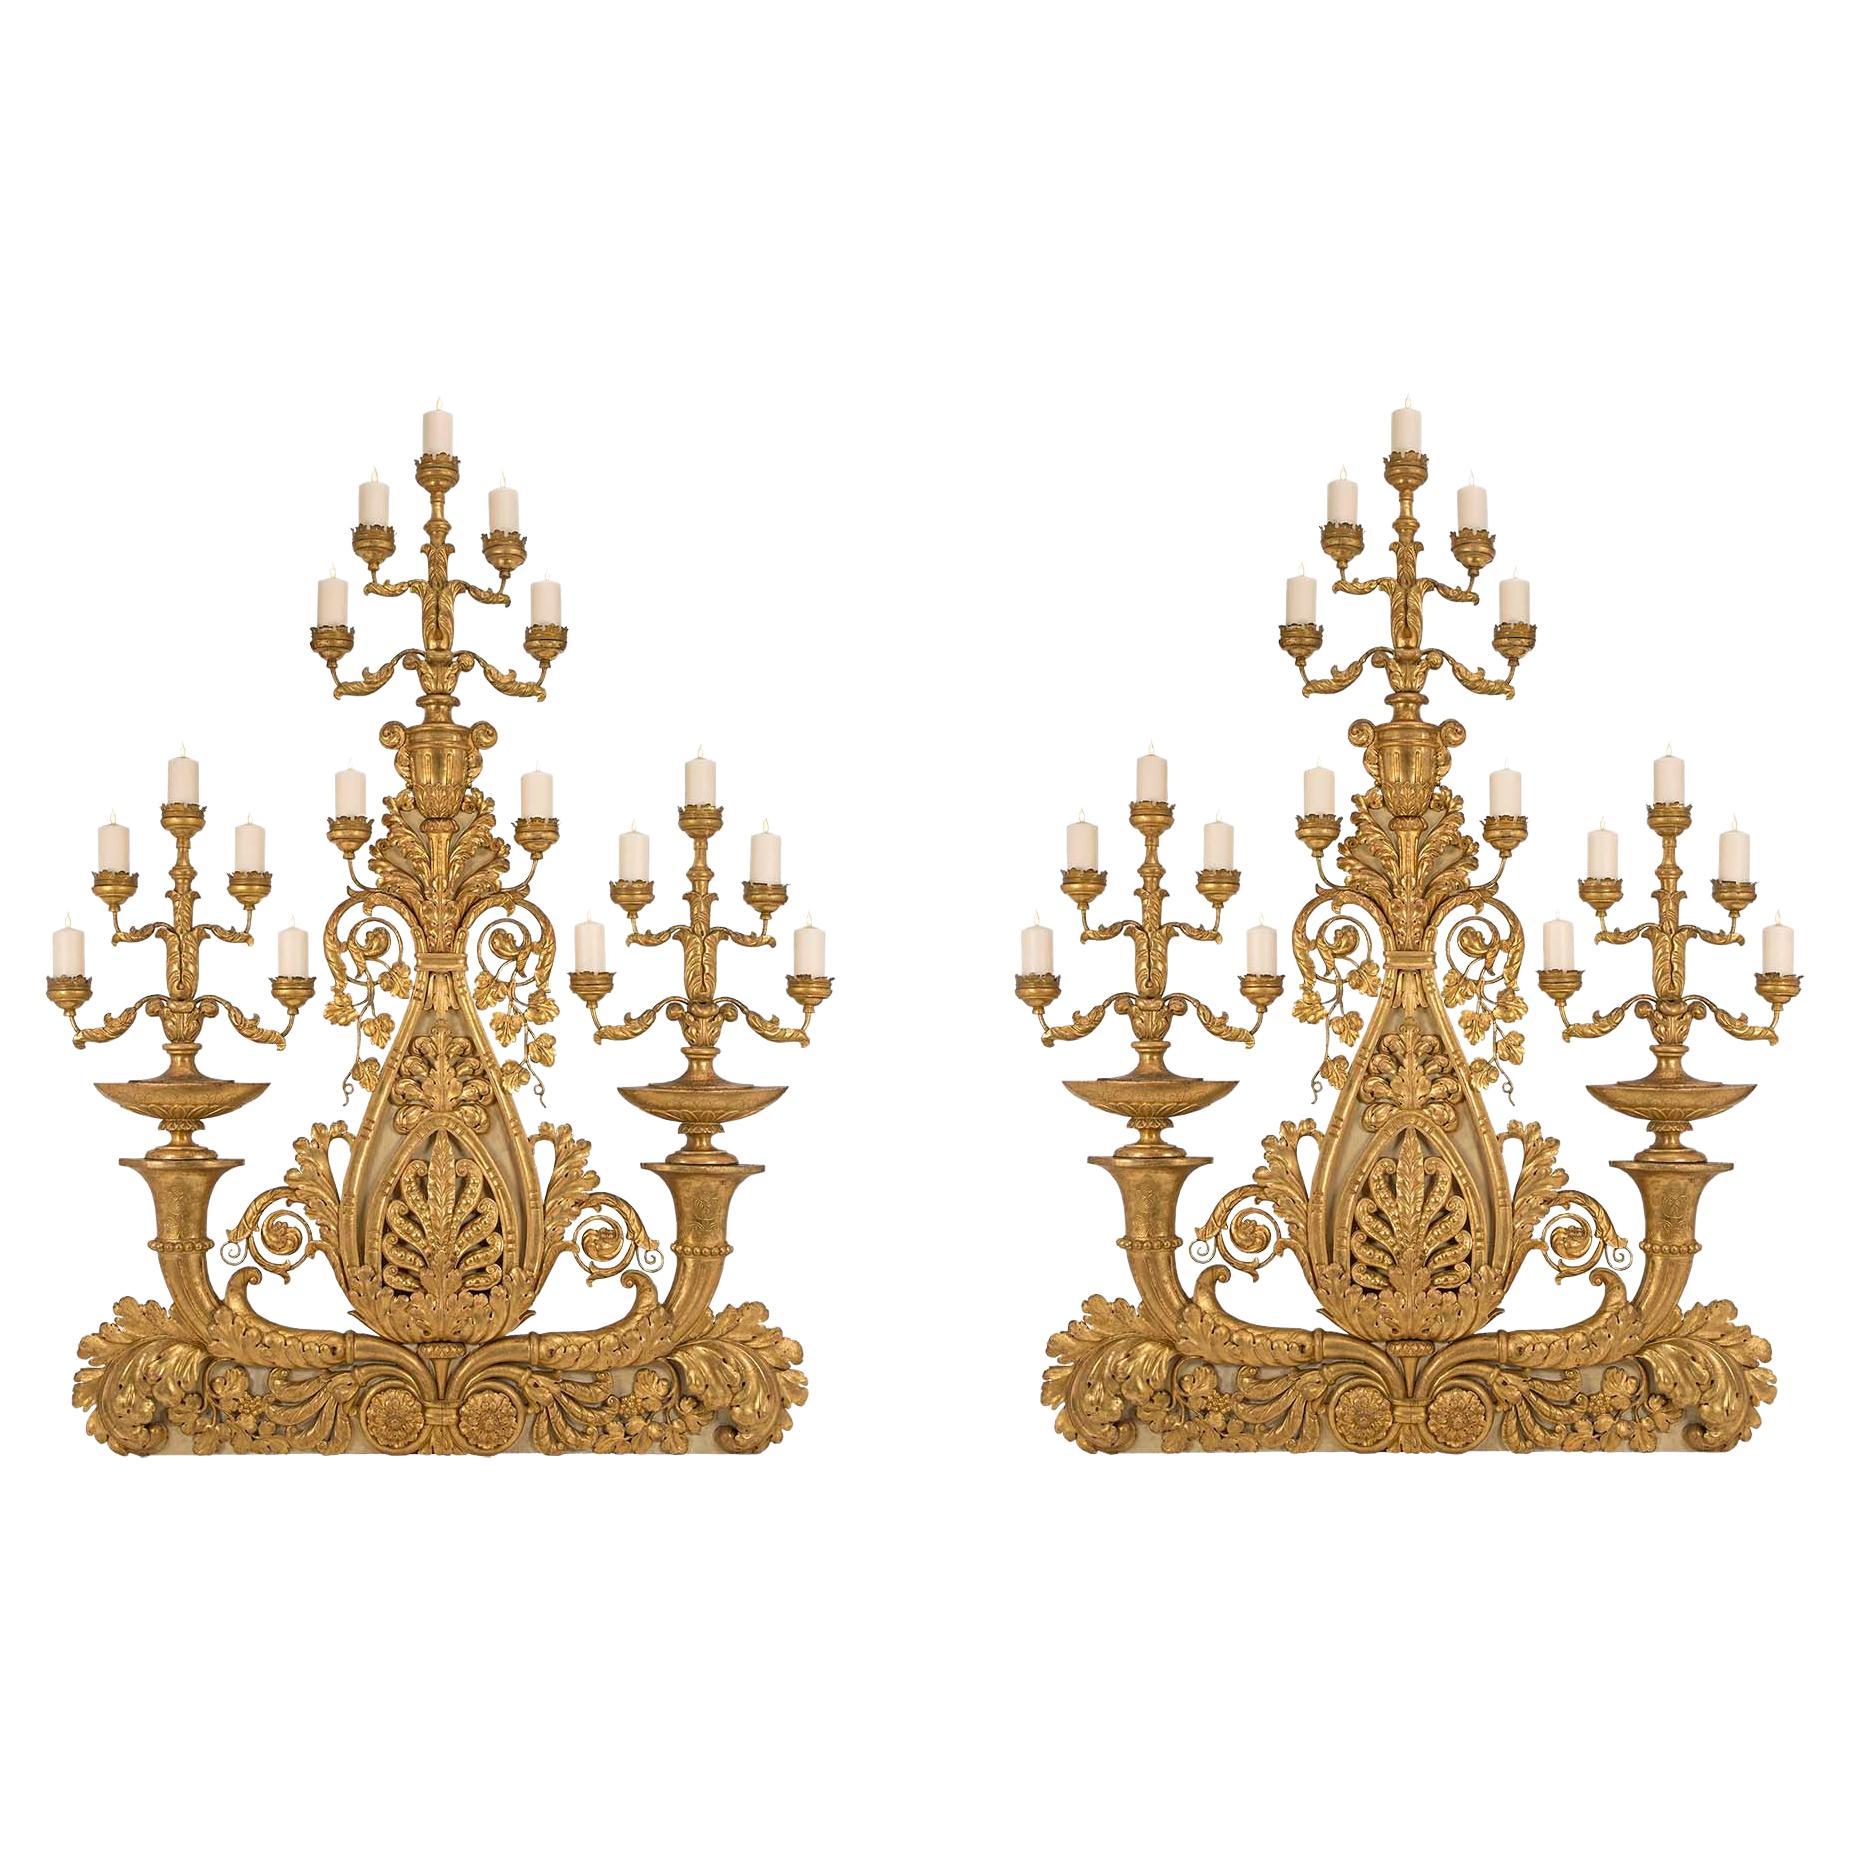 Italian 18th Century Monumental Giltwood and Gilt Metal Tuscan Candelabras For Sale